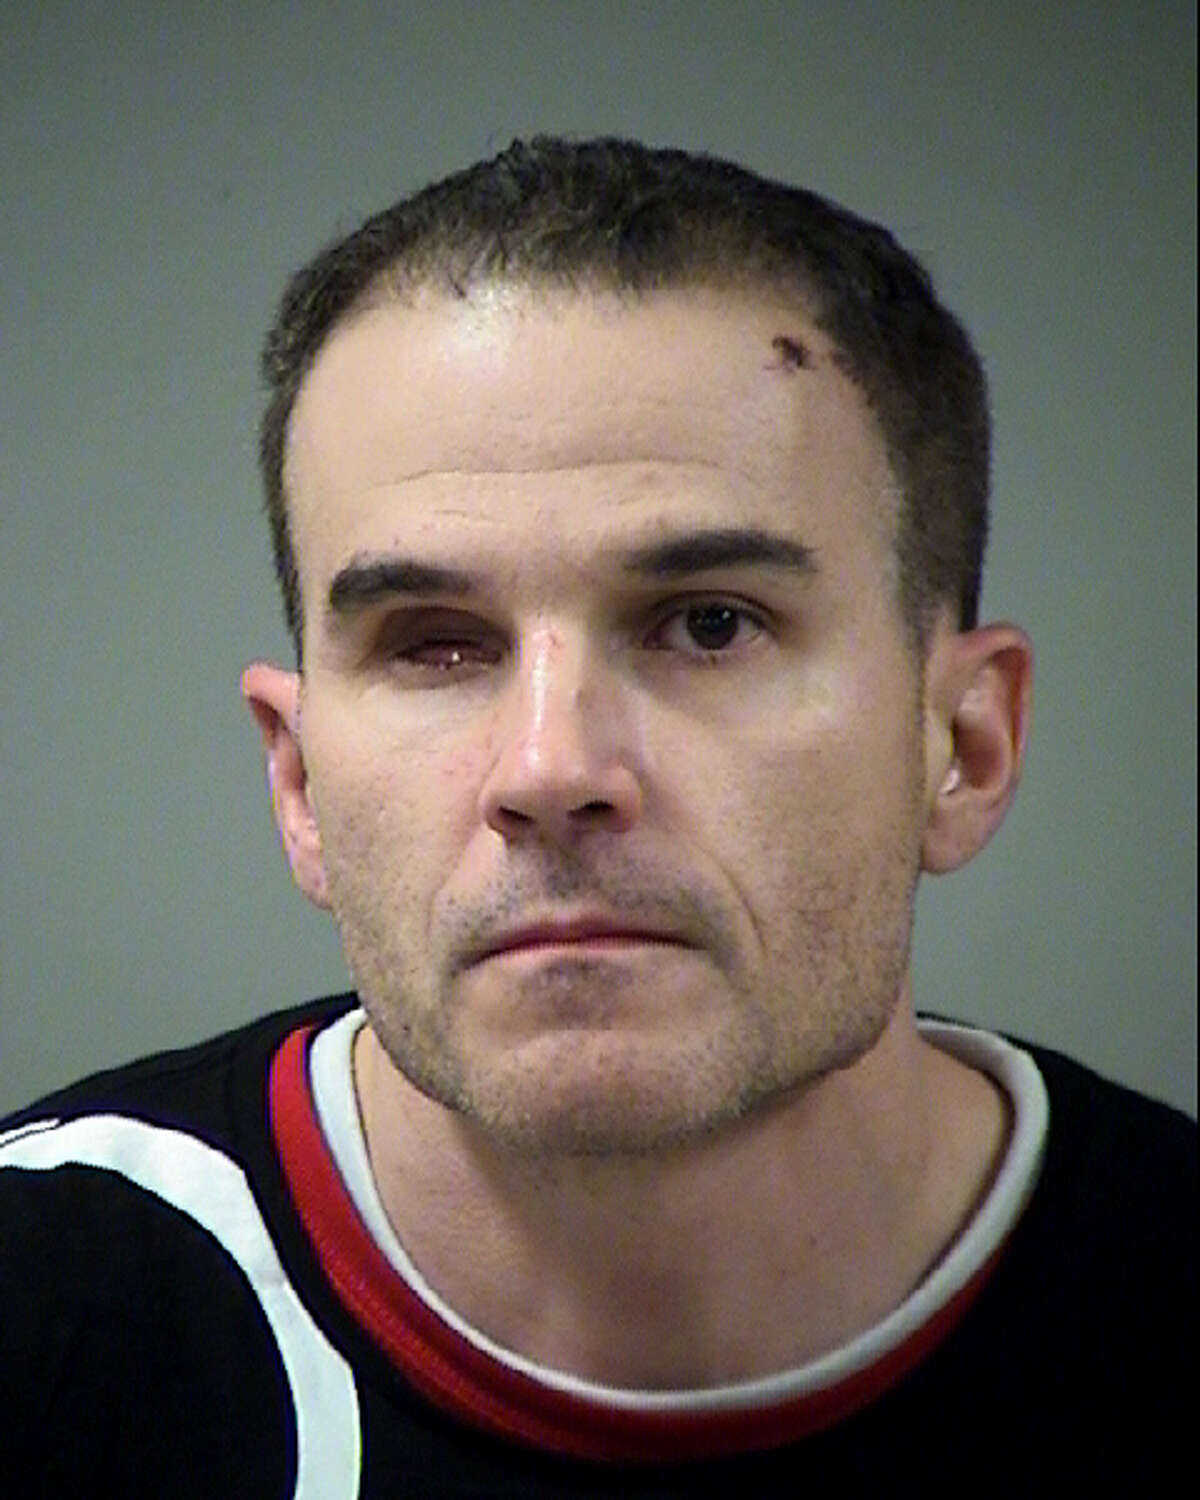 Tyler Anderson Freeman, 40, faces a charge of fraudulent use or possession of identifying information with intent to harm or defraud. He was booked into the Bexar County Jail and bailed out on Sunday.